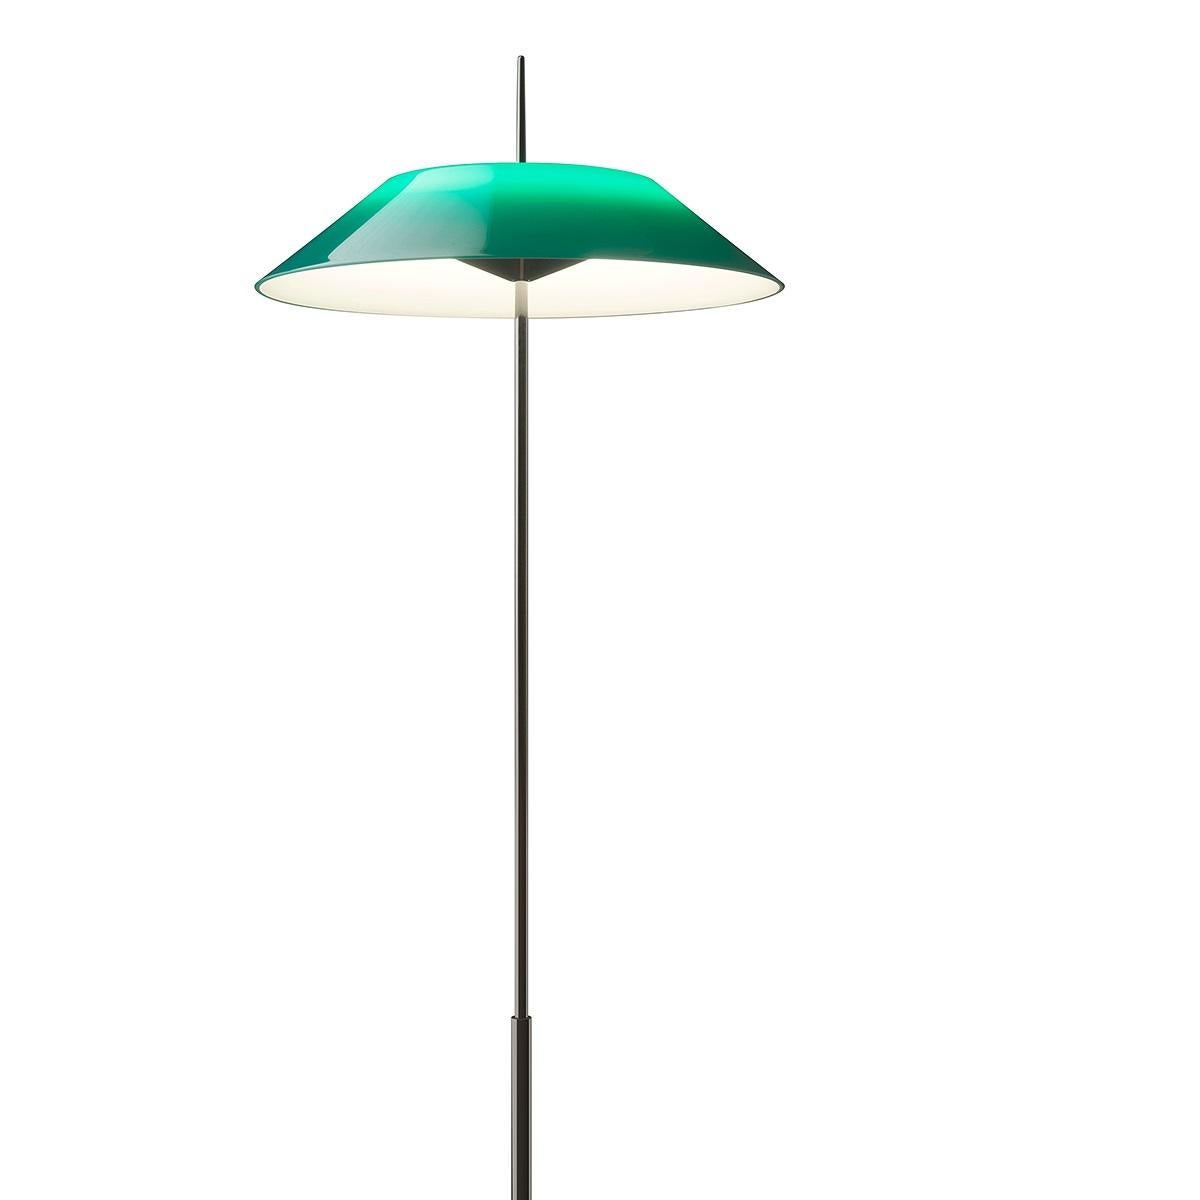 The Mayfair lamps are a Diego Fortunato design proposal. The entire Mayfair collection incorporates LED lighting and comes in green.

Installation type: Surface mounted

Shade: Polycarbonate diffuser

Materials
Base: Aluminum
Shade: